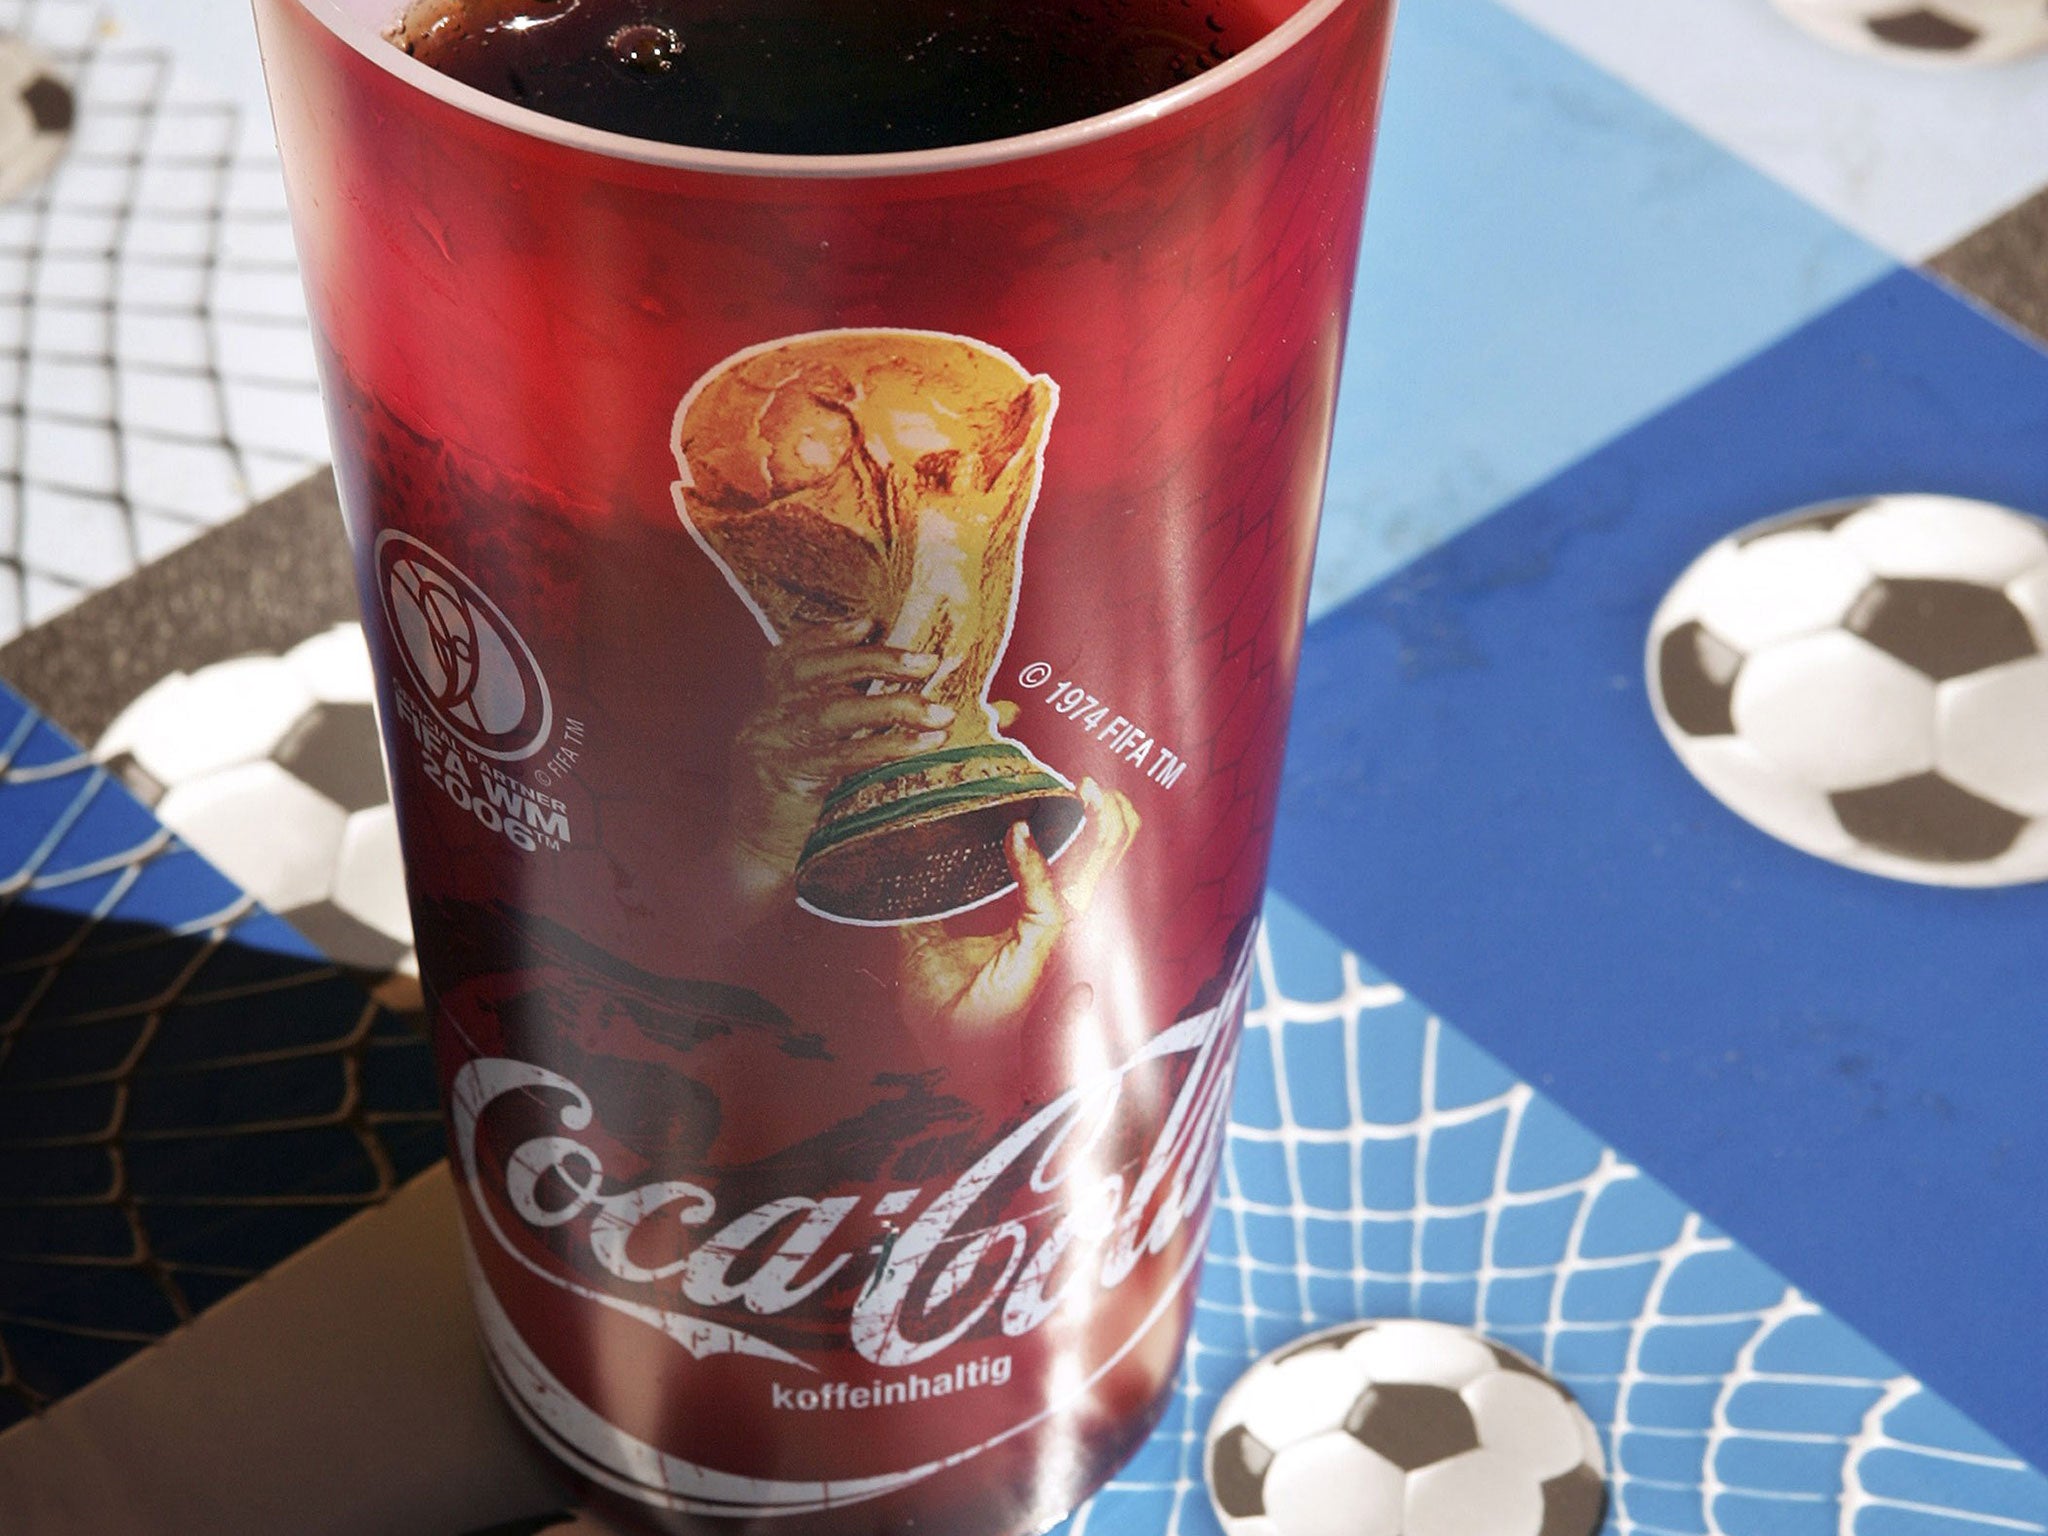 A World Cup branded Coca-Cola drink sits on a football patterned table cloth on June 11, 2006 in Frankfurt, Germany. On the third day of the FIFA World Cup three matches will take place in Leipzig, Nuremberg and Cologne.